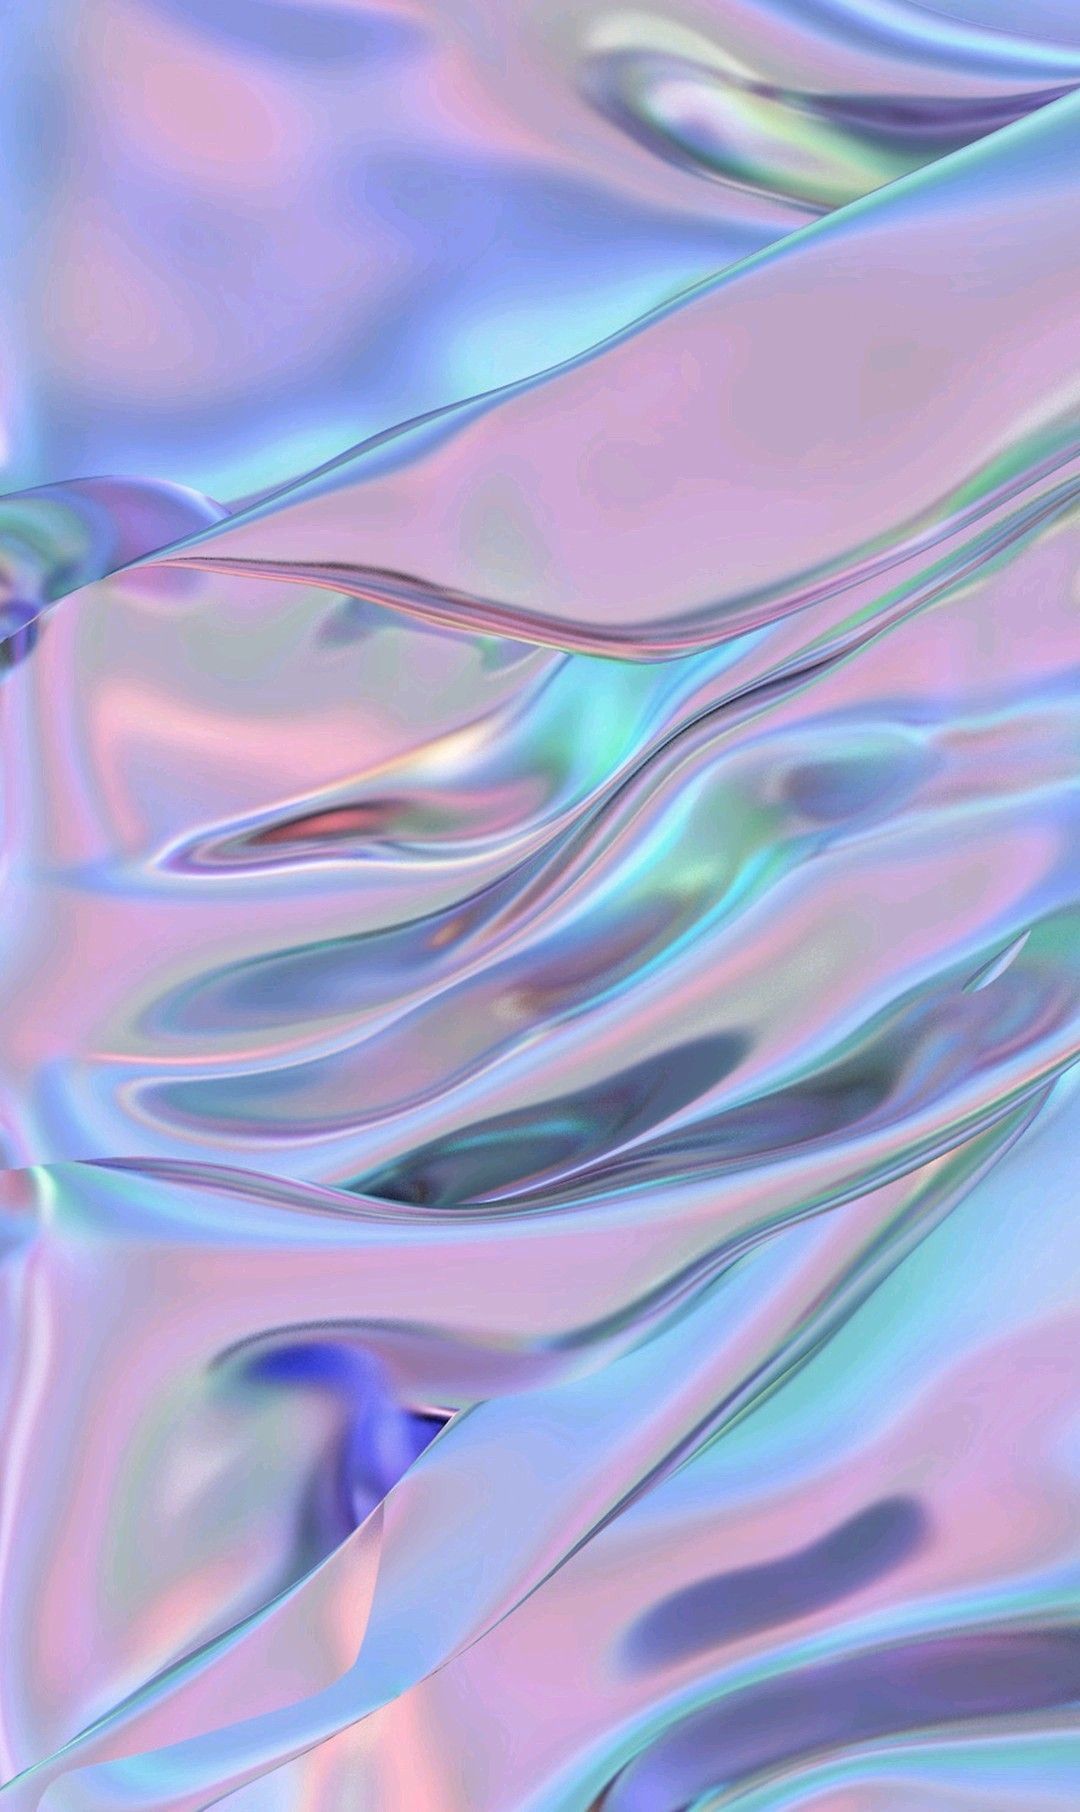 Iphone wallpaper holographic - photo#29 - Holographic